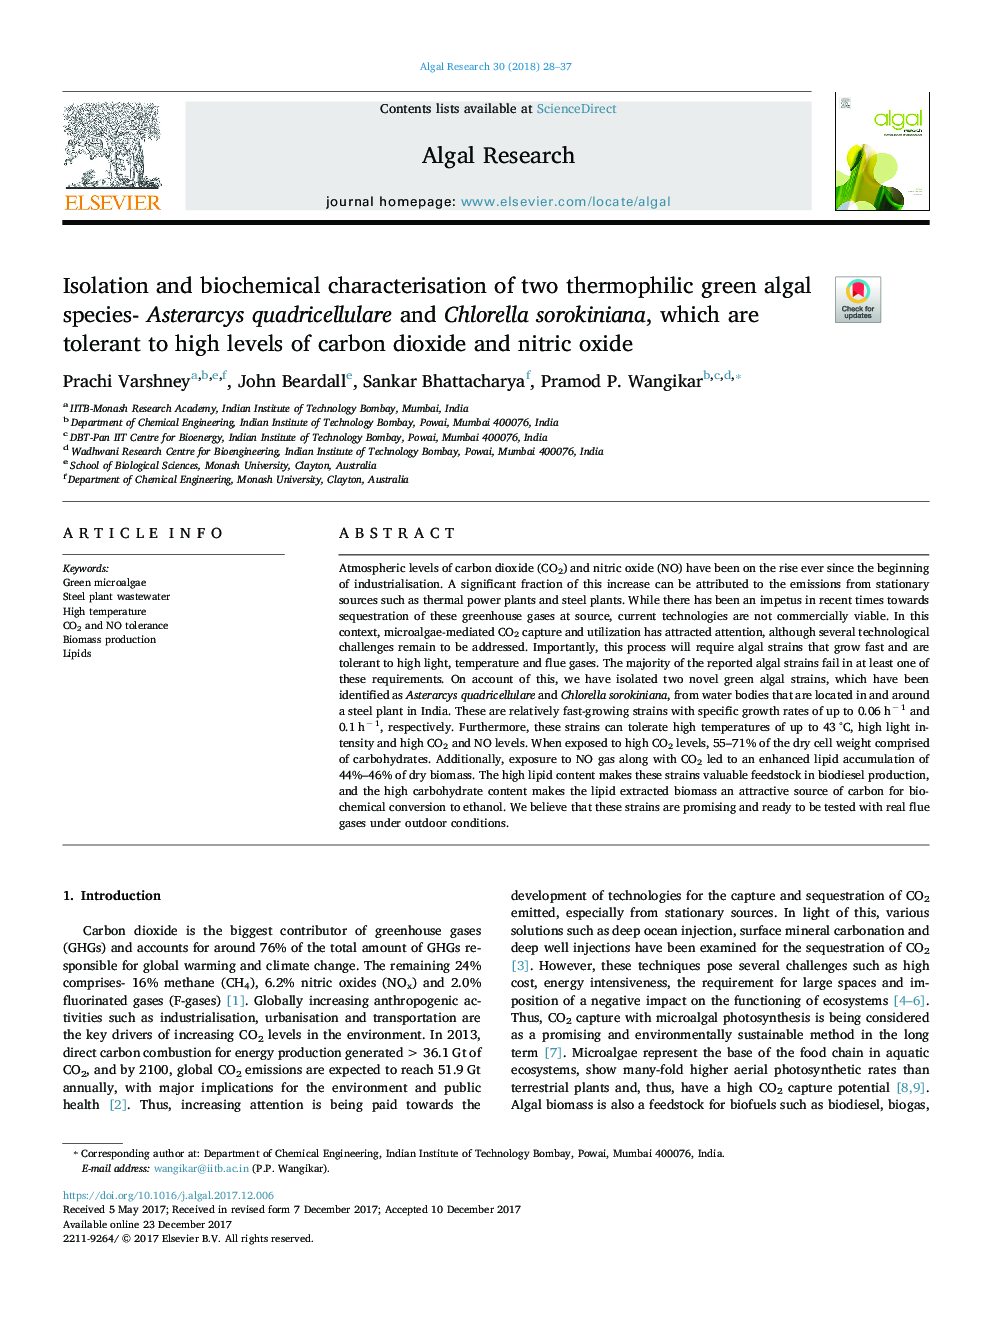 Isolation and biochemical characterisation of two thermophilic green algal species- Asterarcys quadricellulare and Chlorella sorokiniana, which are tolerant to high levels of carbon dioxide and nitric oxide